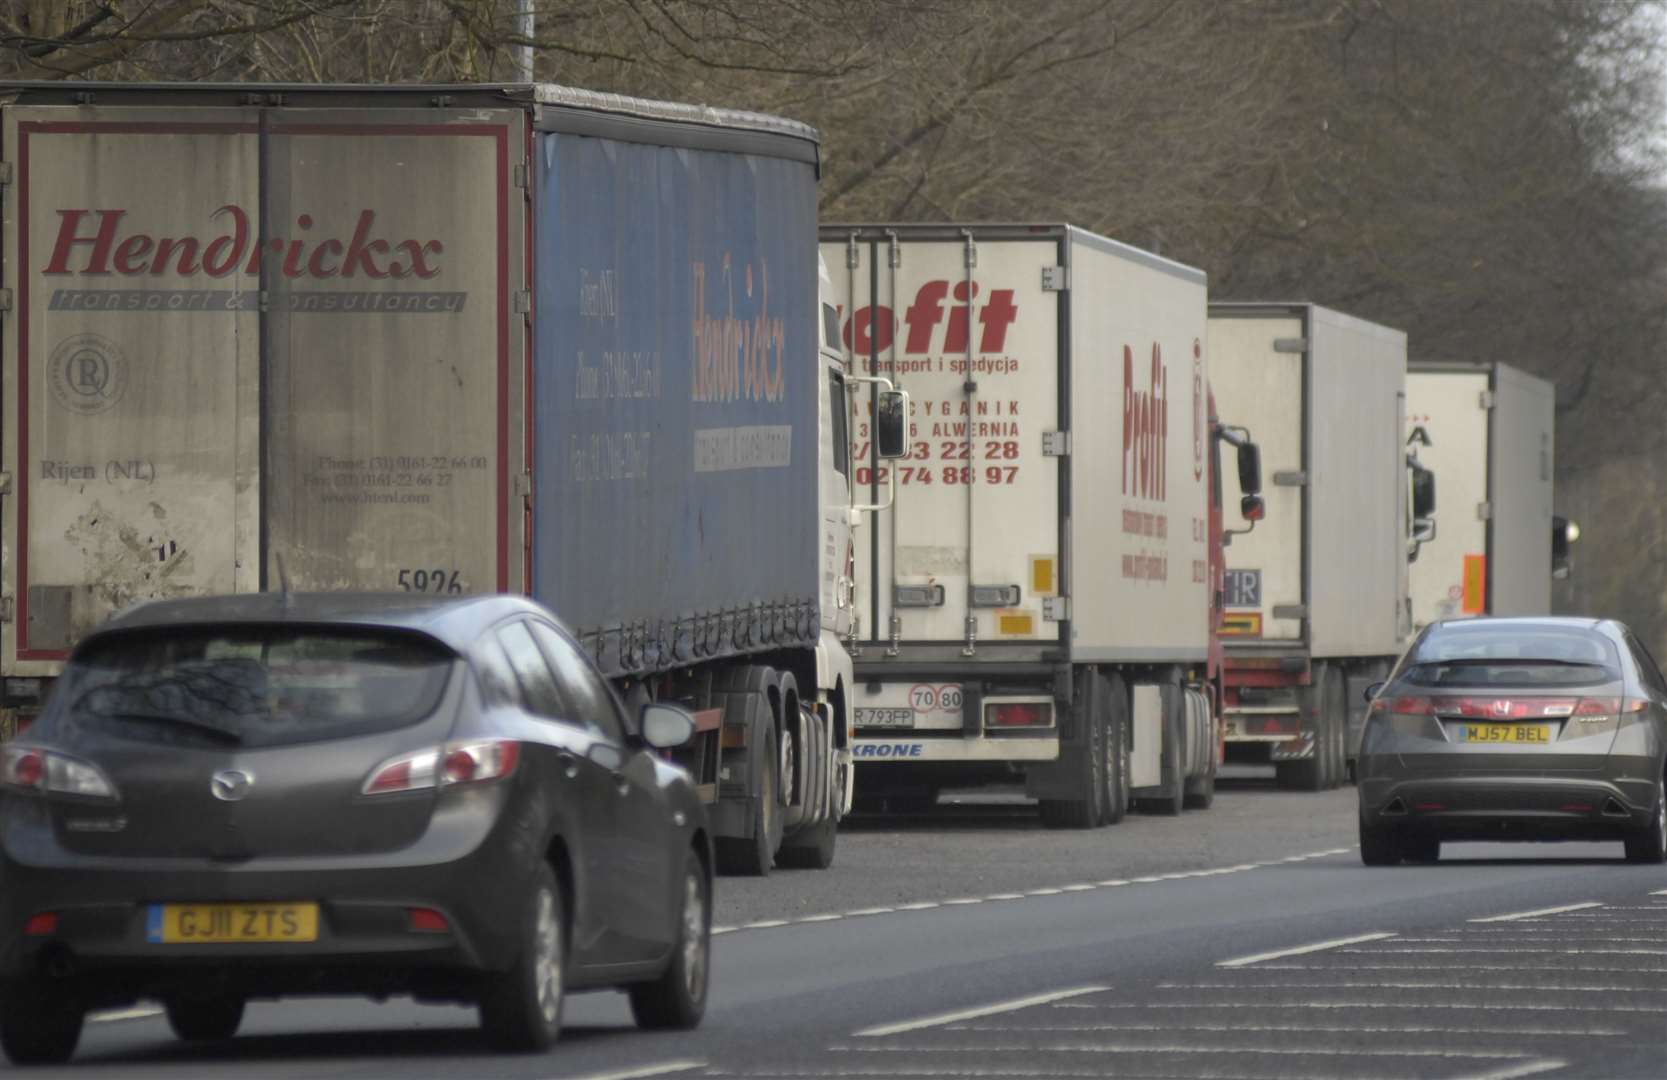 The plan is hoped to get lorries out of lay-bys